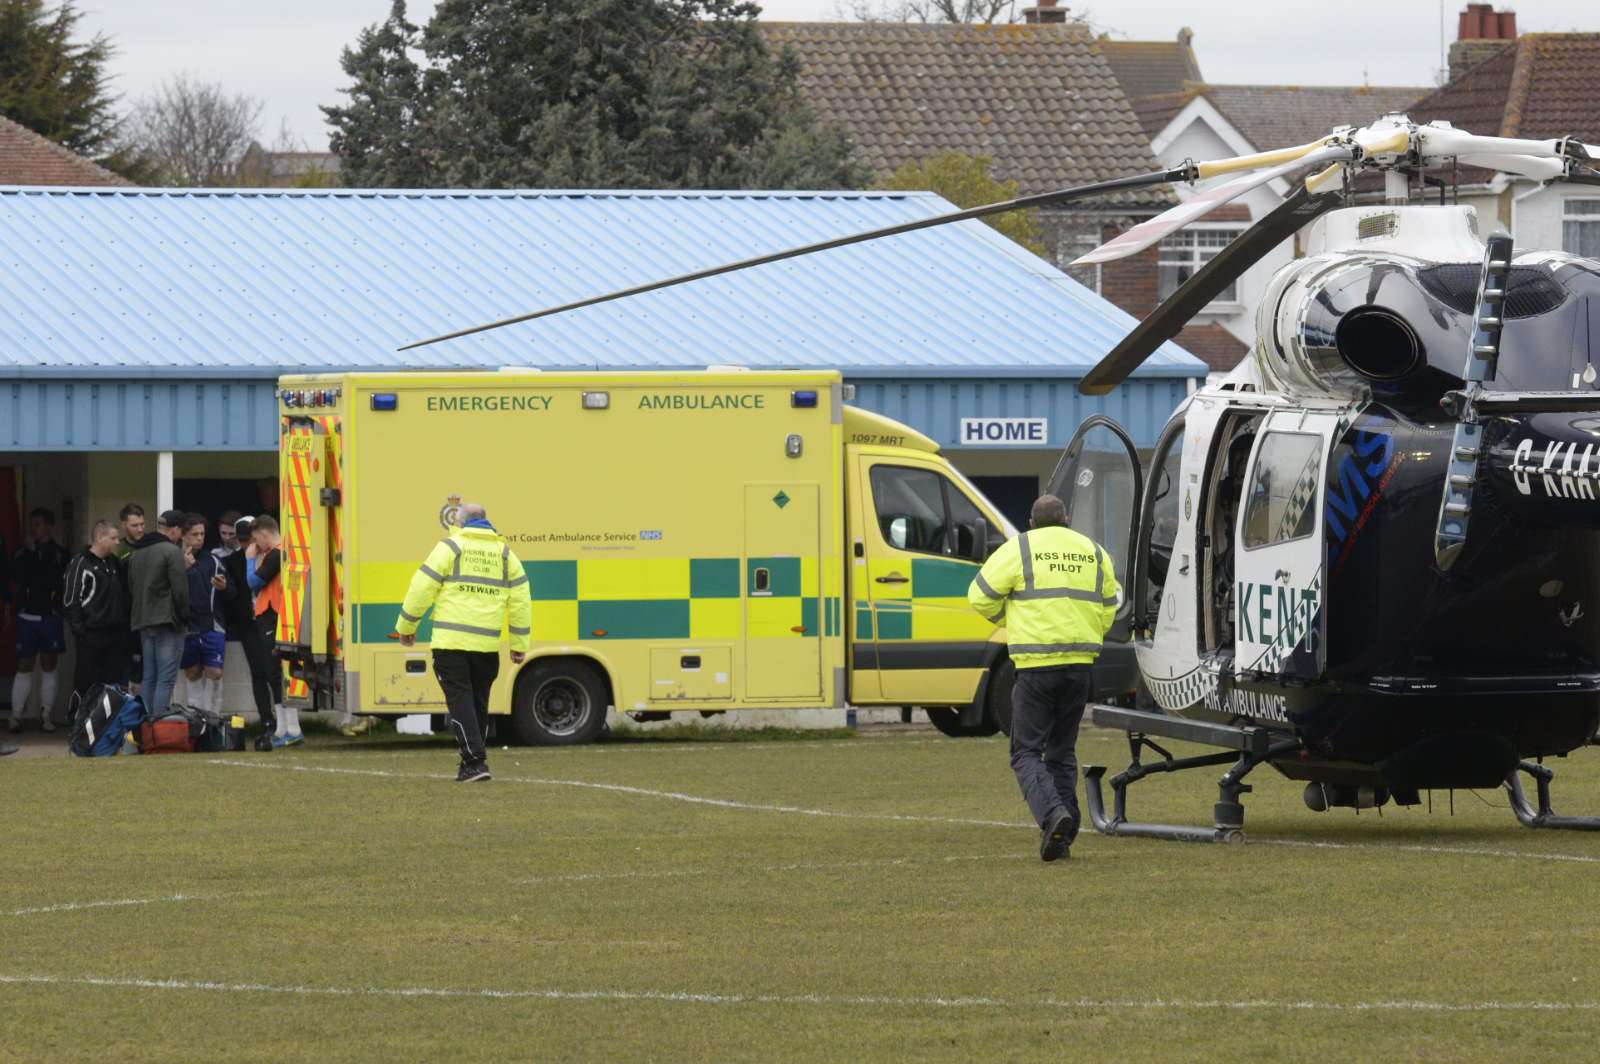 A land and air ambulance attended. Picture: Chris Davey